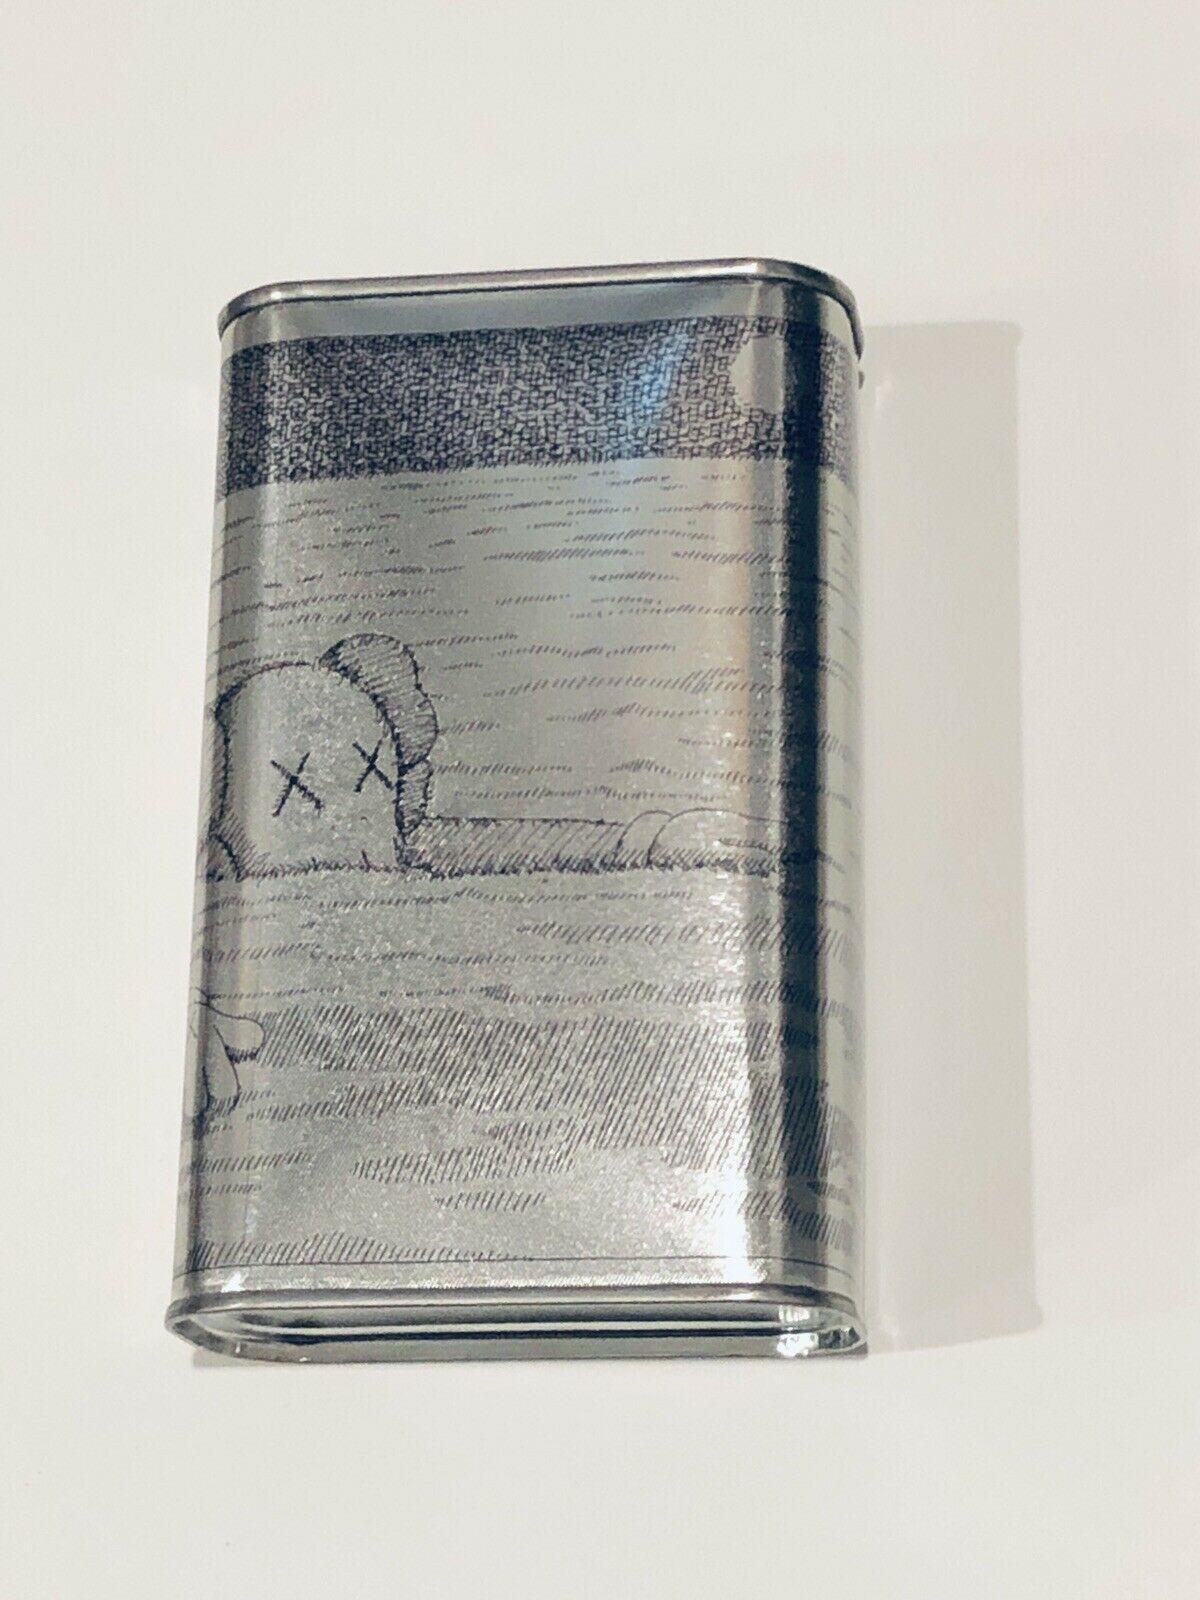 KAWS limited edition of 500 Olive Oil Tins From Italy with Due Leoni Street Art  1